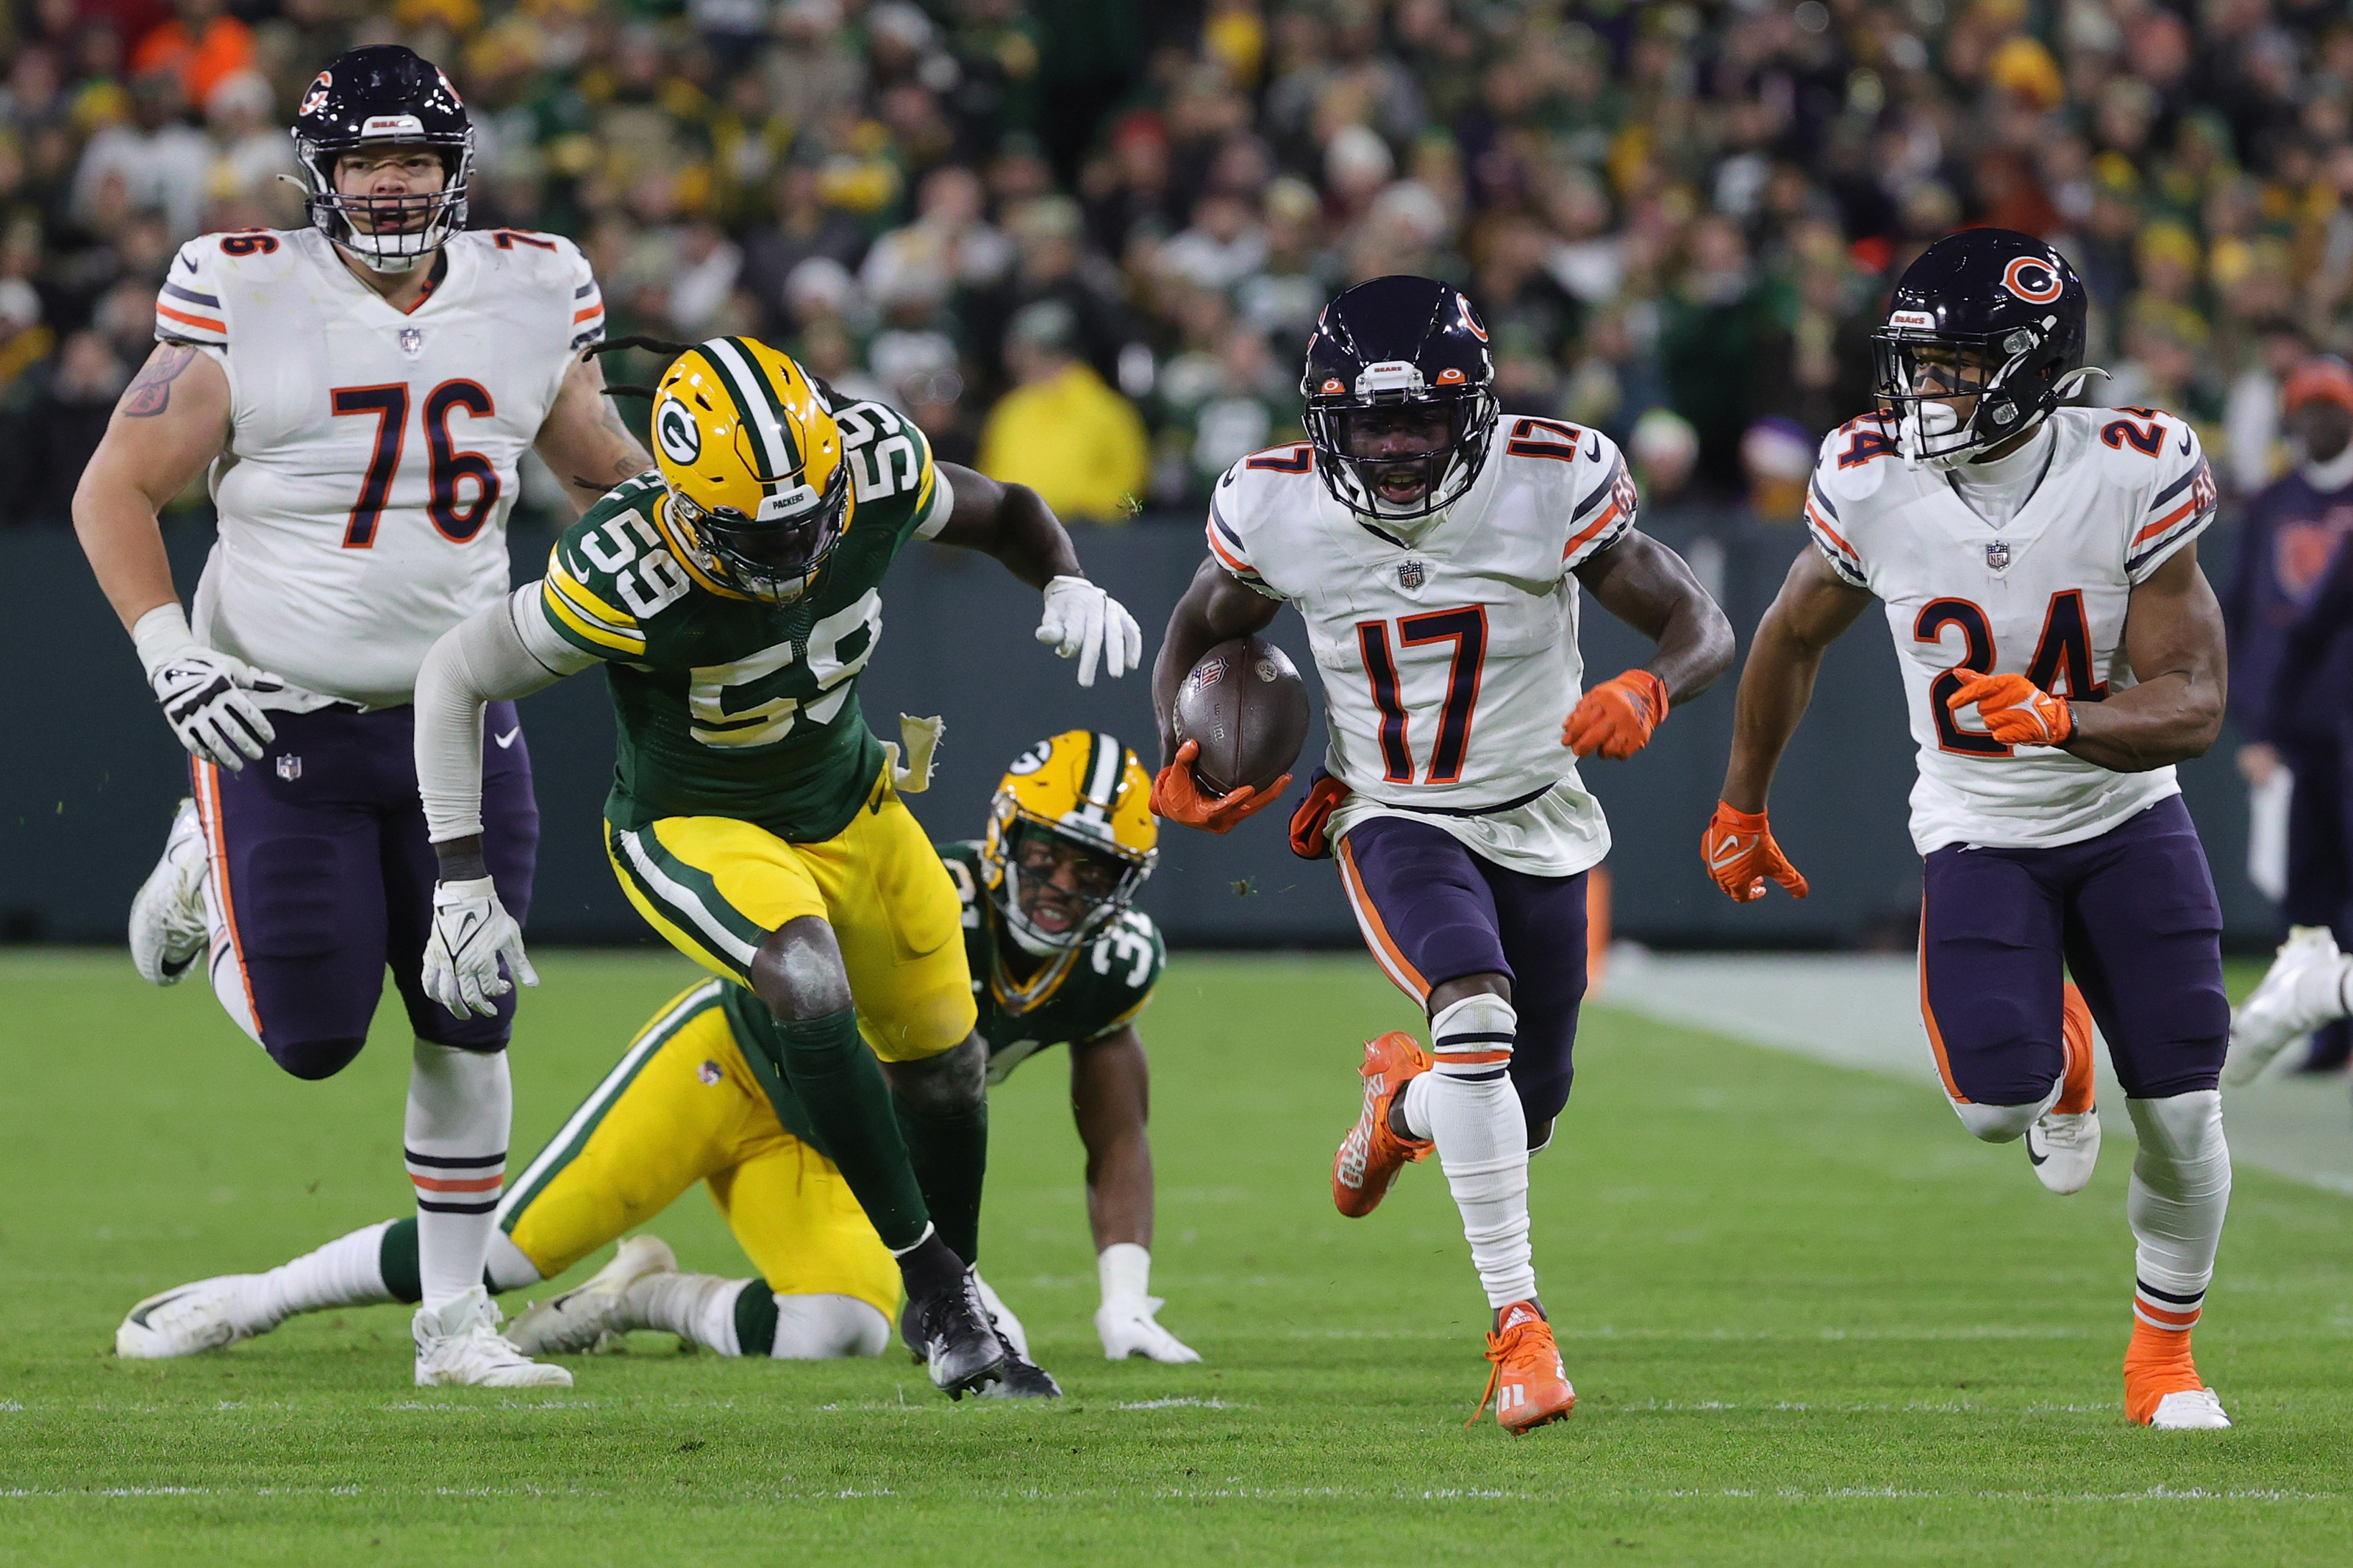 Jakeem Grant comes back a punt 97 yards for a touchdown, Bears lead 27-21 at halftime